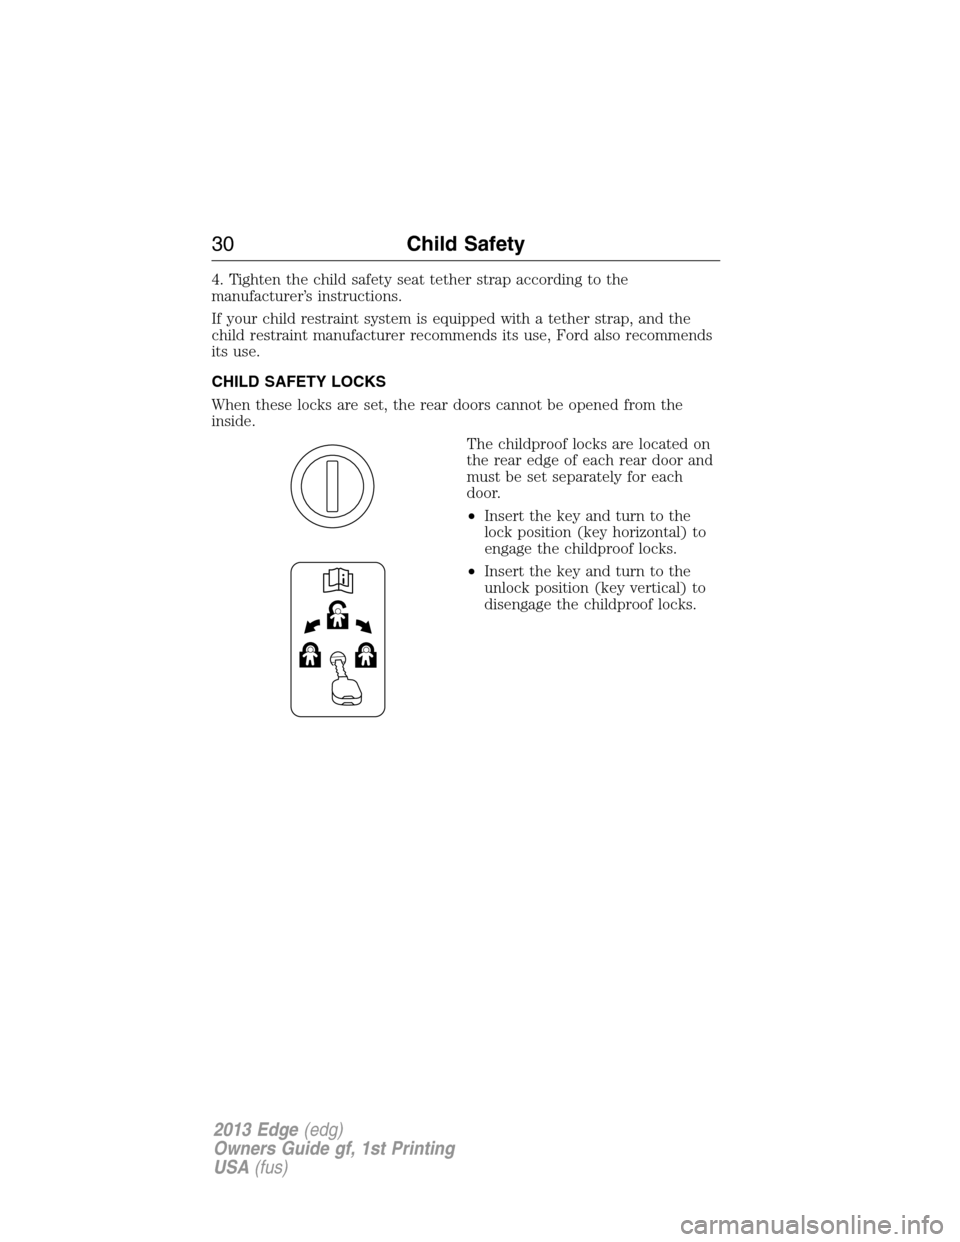 FORD EDGE 2013 1.G Owners Manual 4. Tighten the child safety seat tether strap according to the
manufacturer’s instructions.
If your child restraint system is equipped with a tether strap, and the
child restraint manufacturer recom